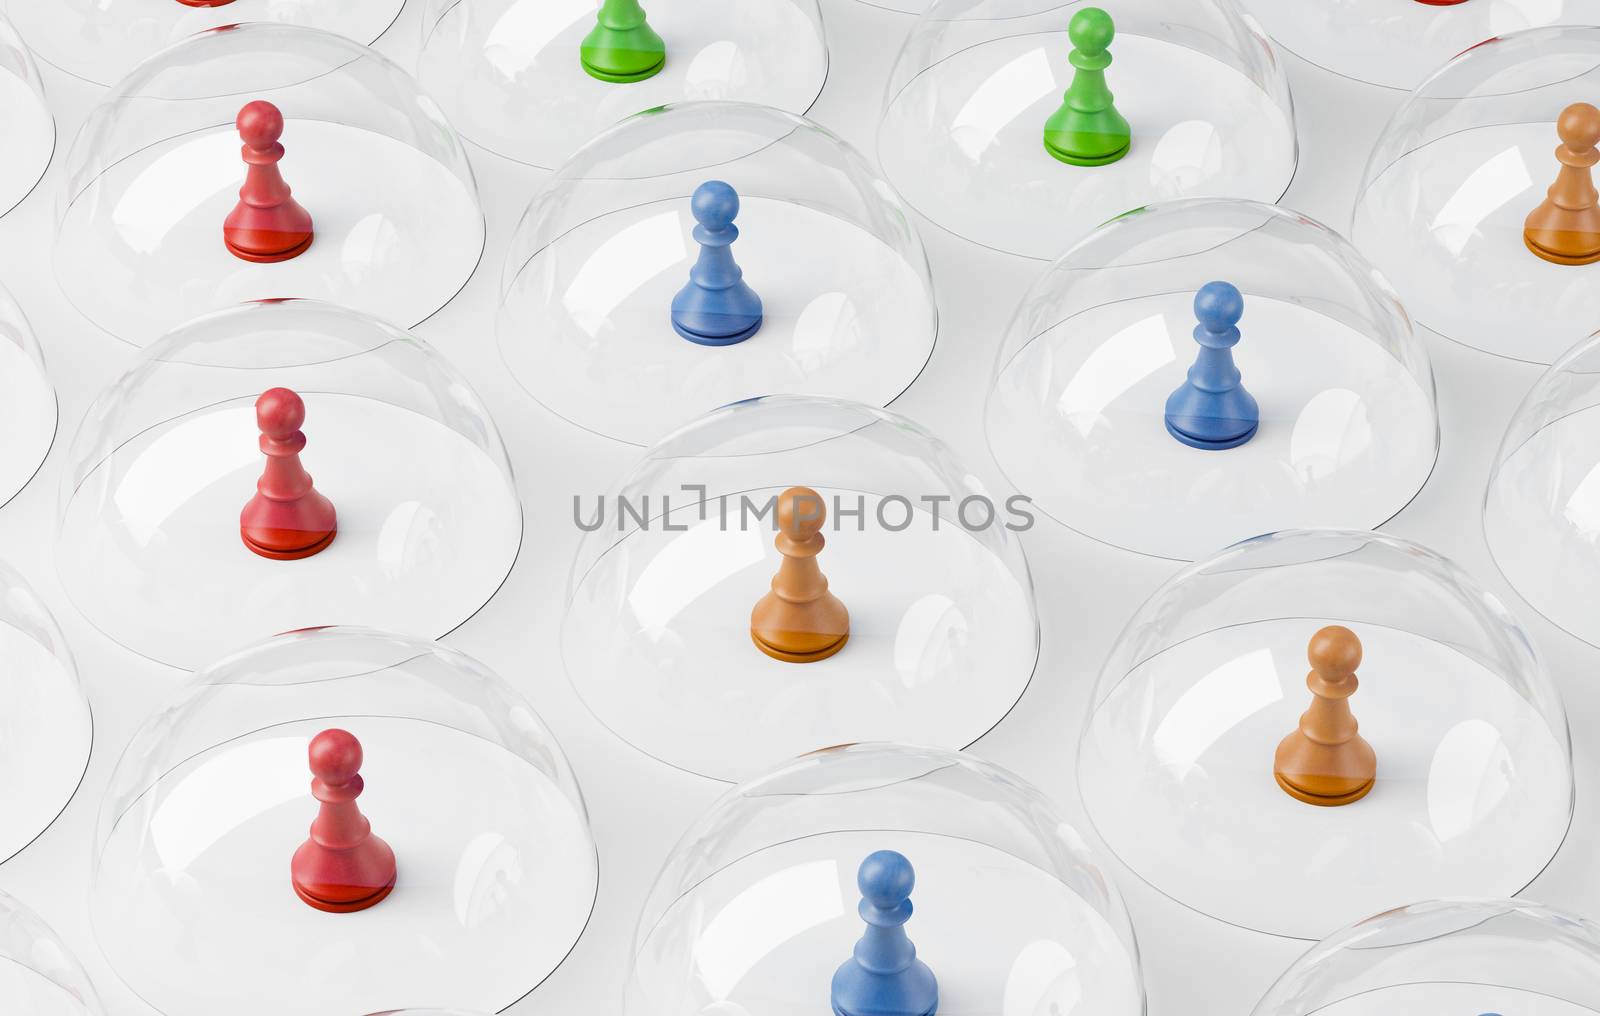 Colorful Wooden Chessmen Under Glass Shields Keeping Distance 3D Illustration, Physical Distancing Concept